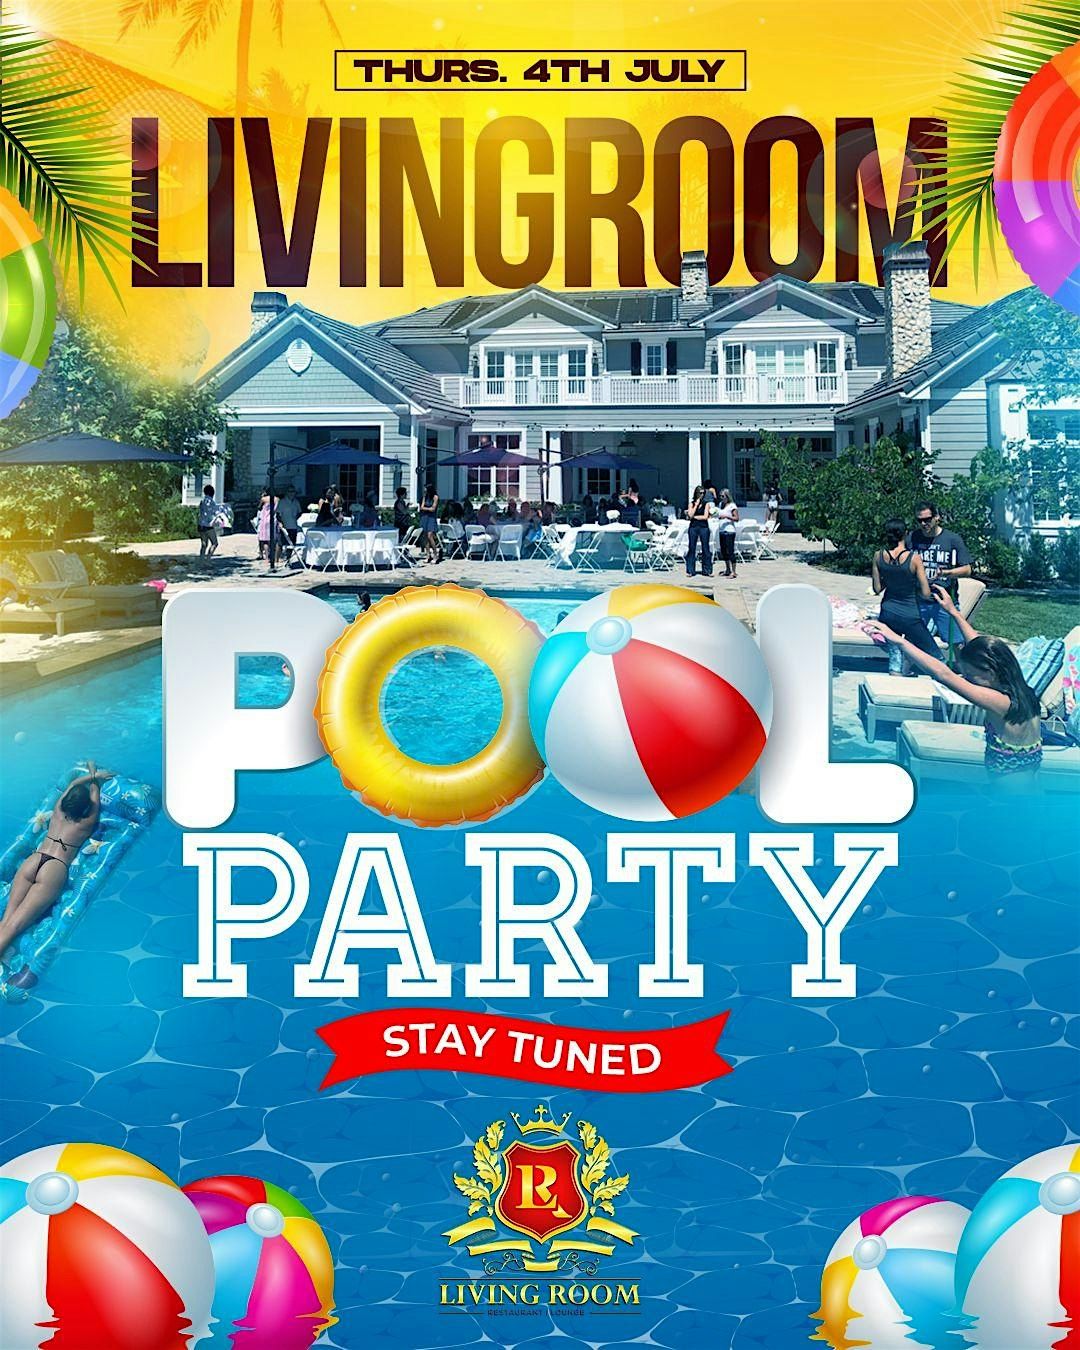 JULY 4TH MANSION POOL PARTY atl